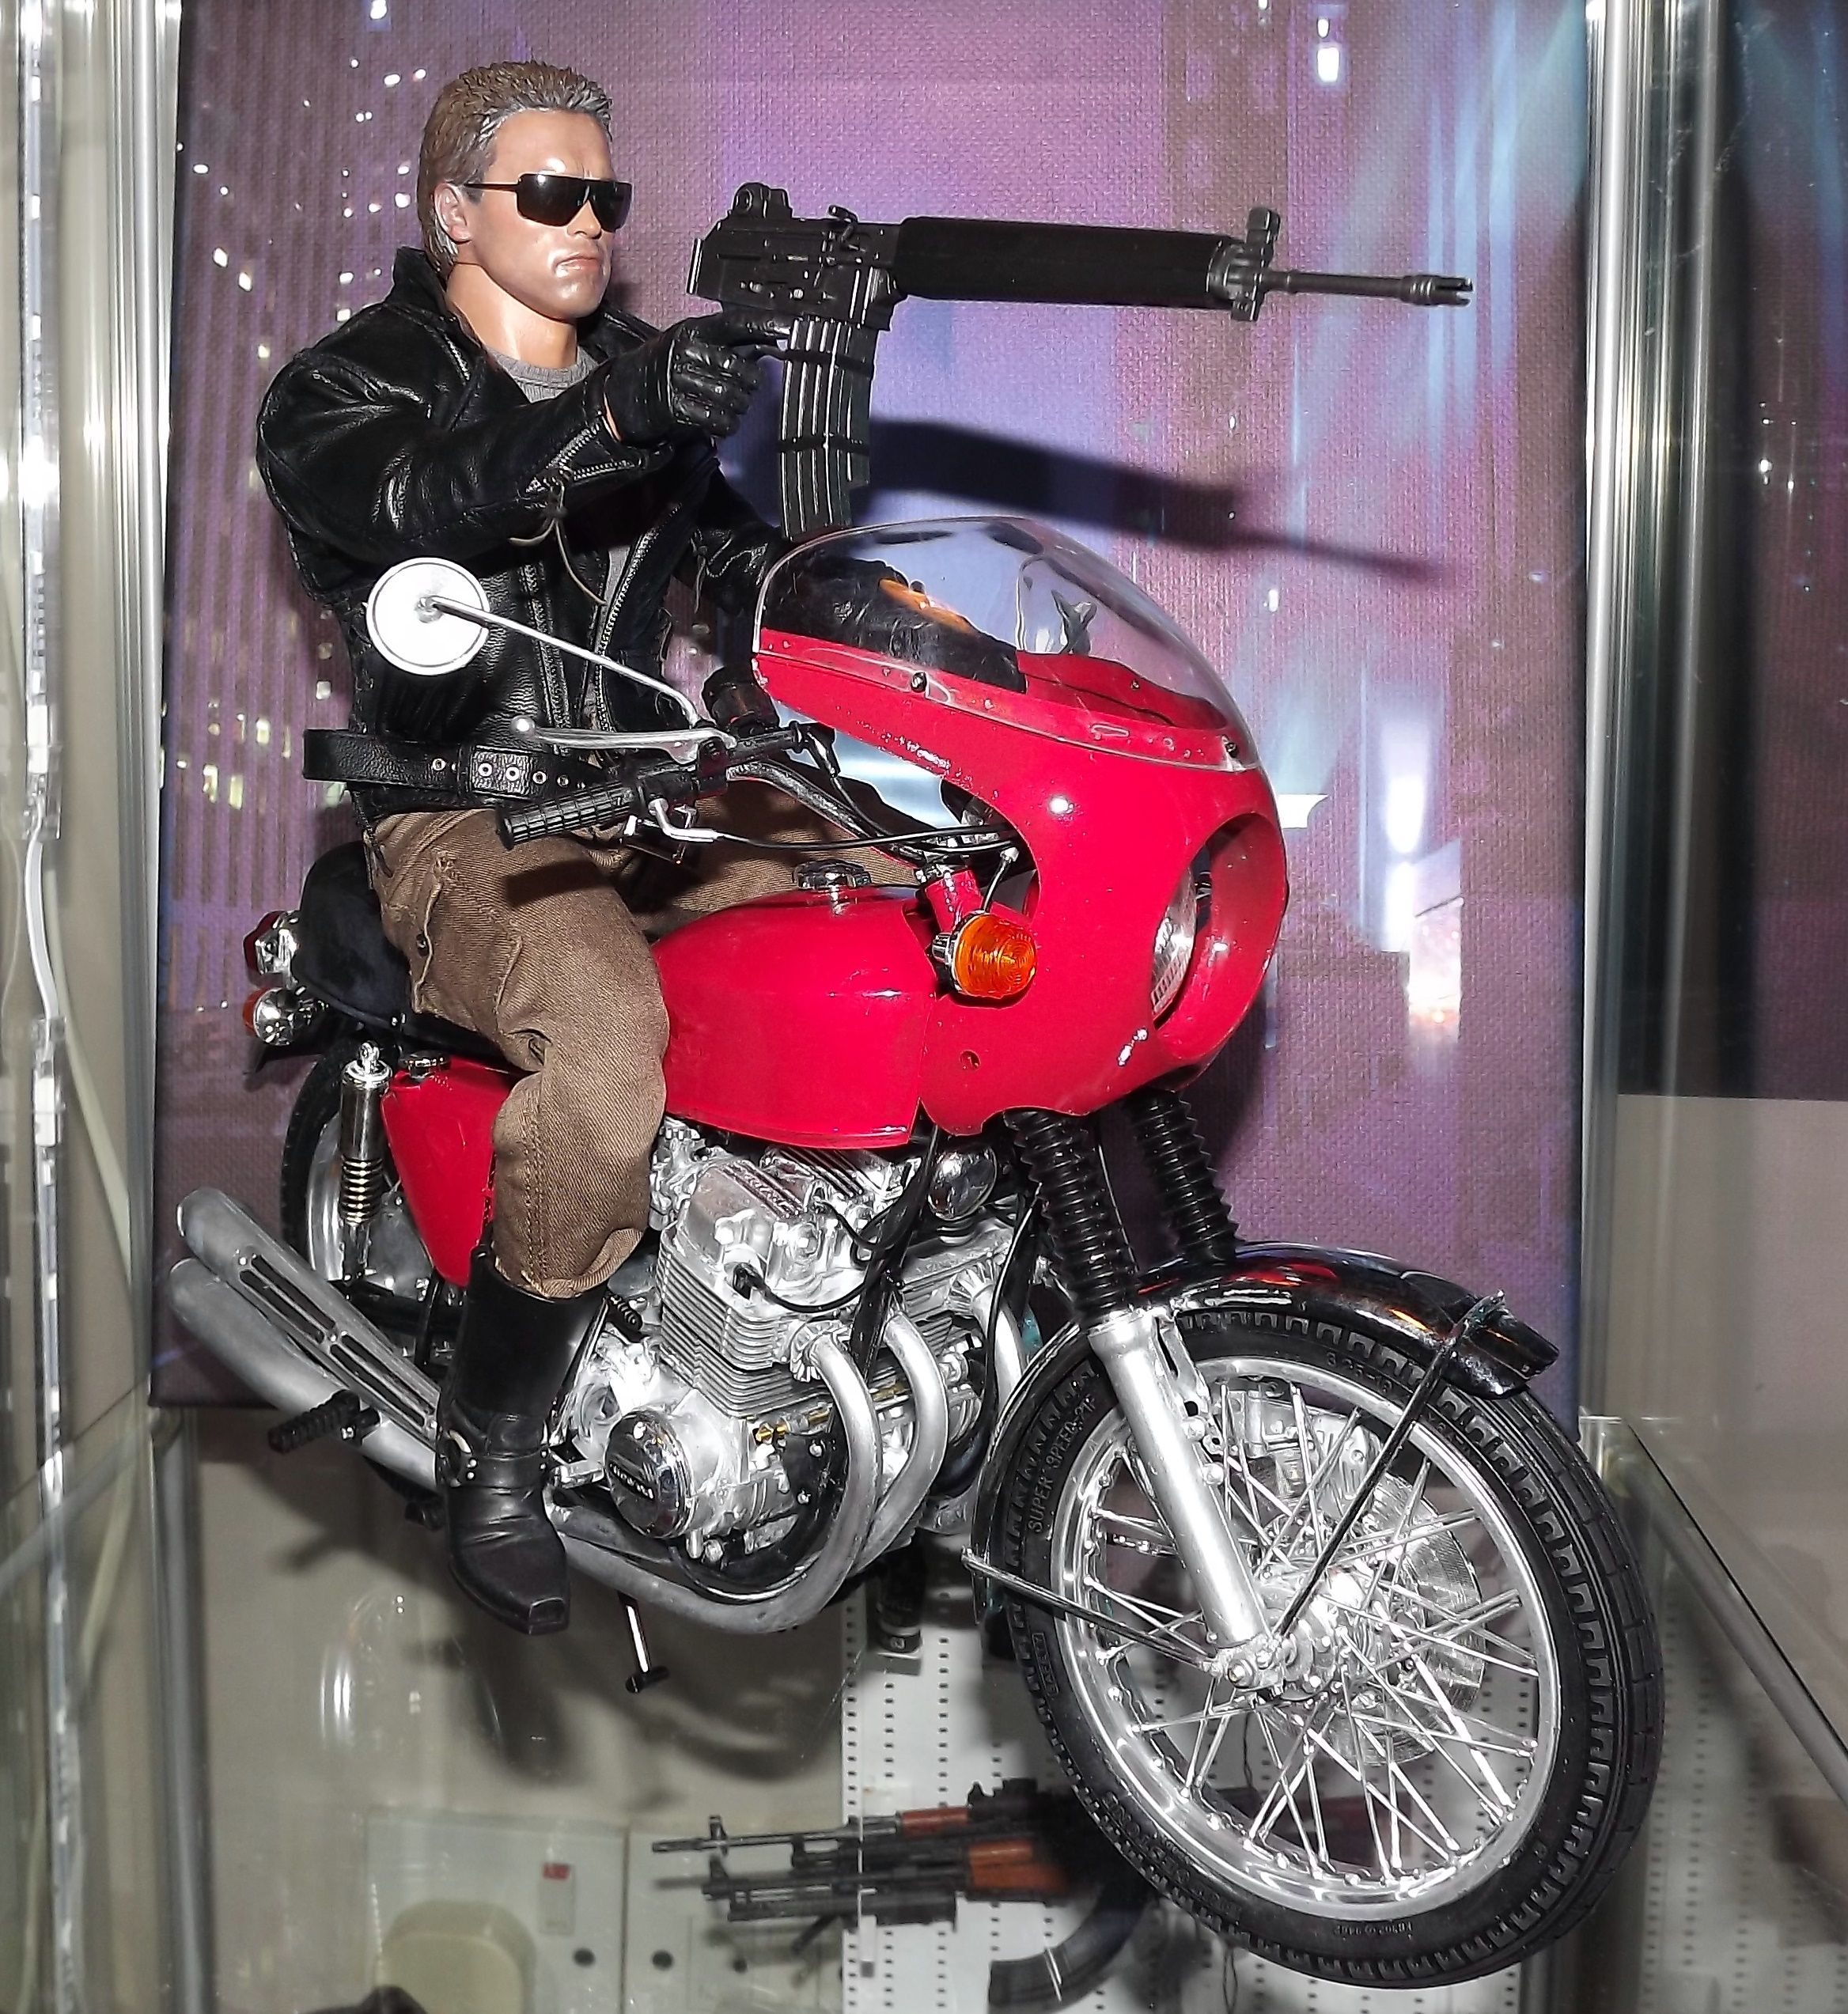 Honda CB750 Four model toy from the first Terminator film